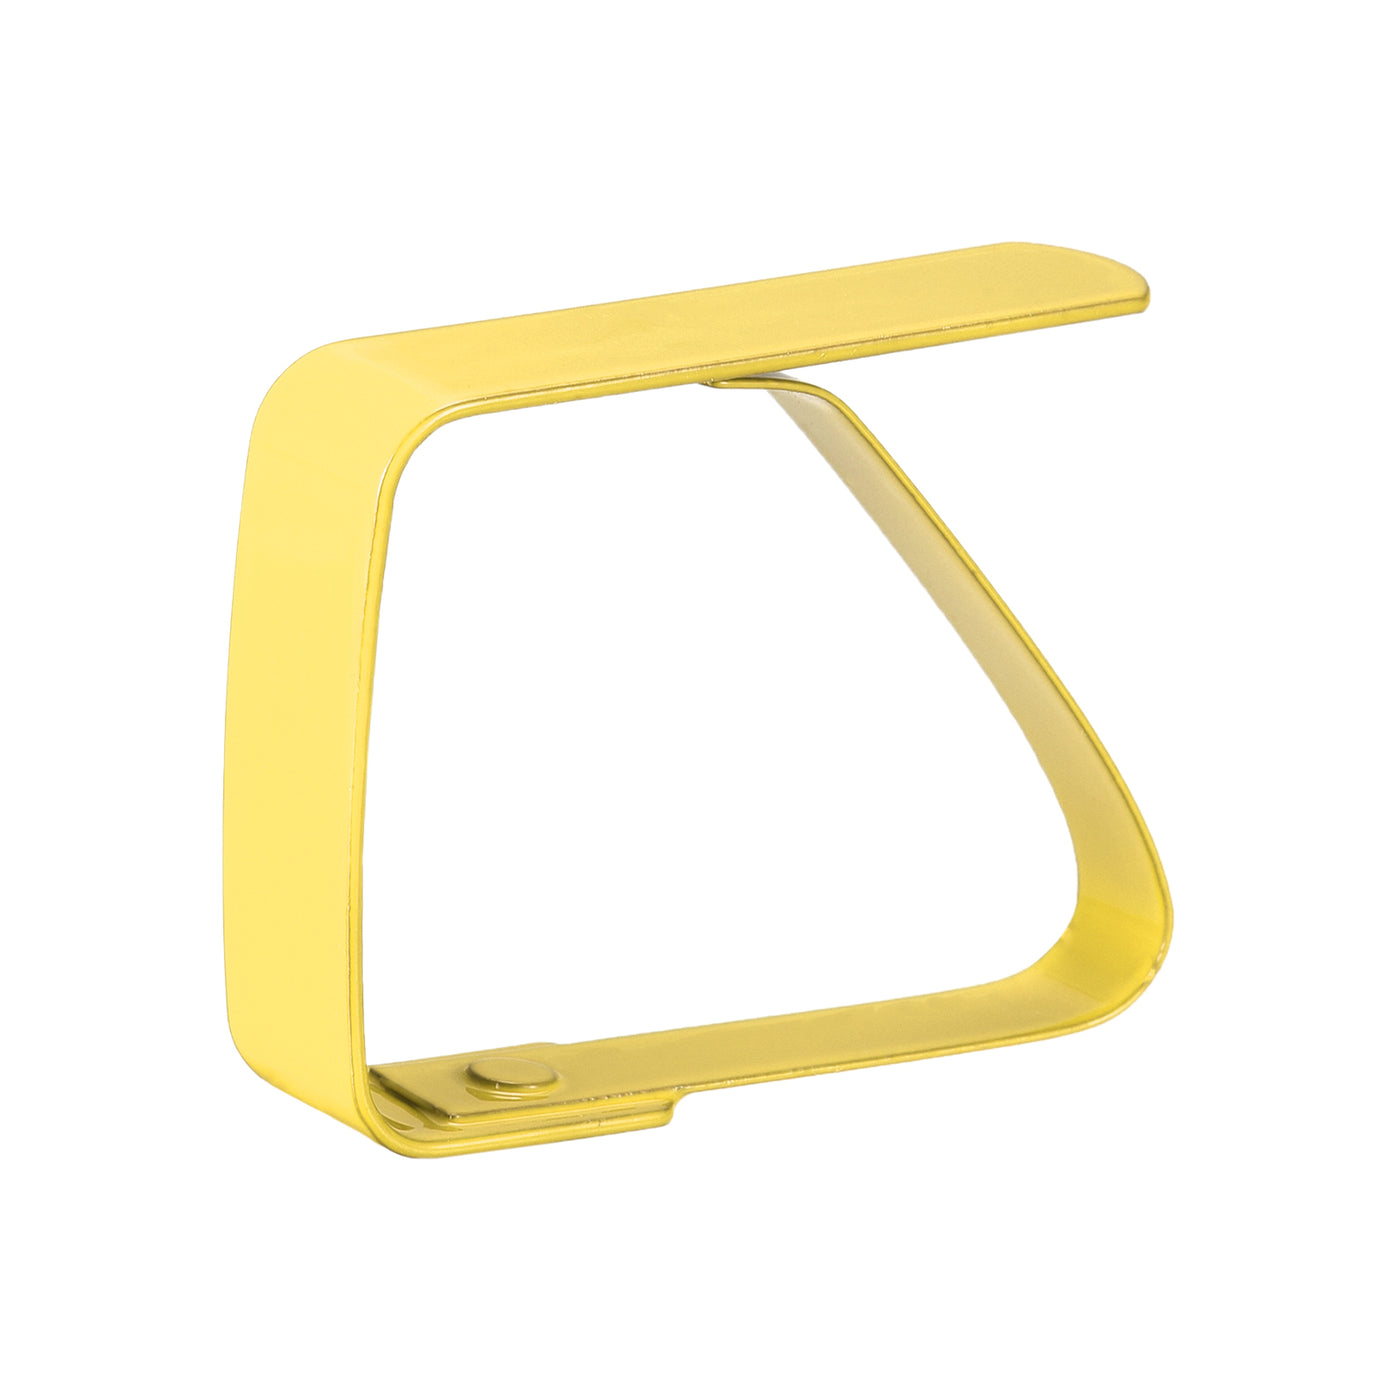 uxcell Uxcell Tablecloth Clips 50mm x 40mm 420 Stainless Steel Table Cloth Holder Yellow 2 Pcs